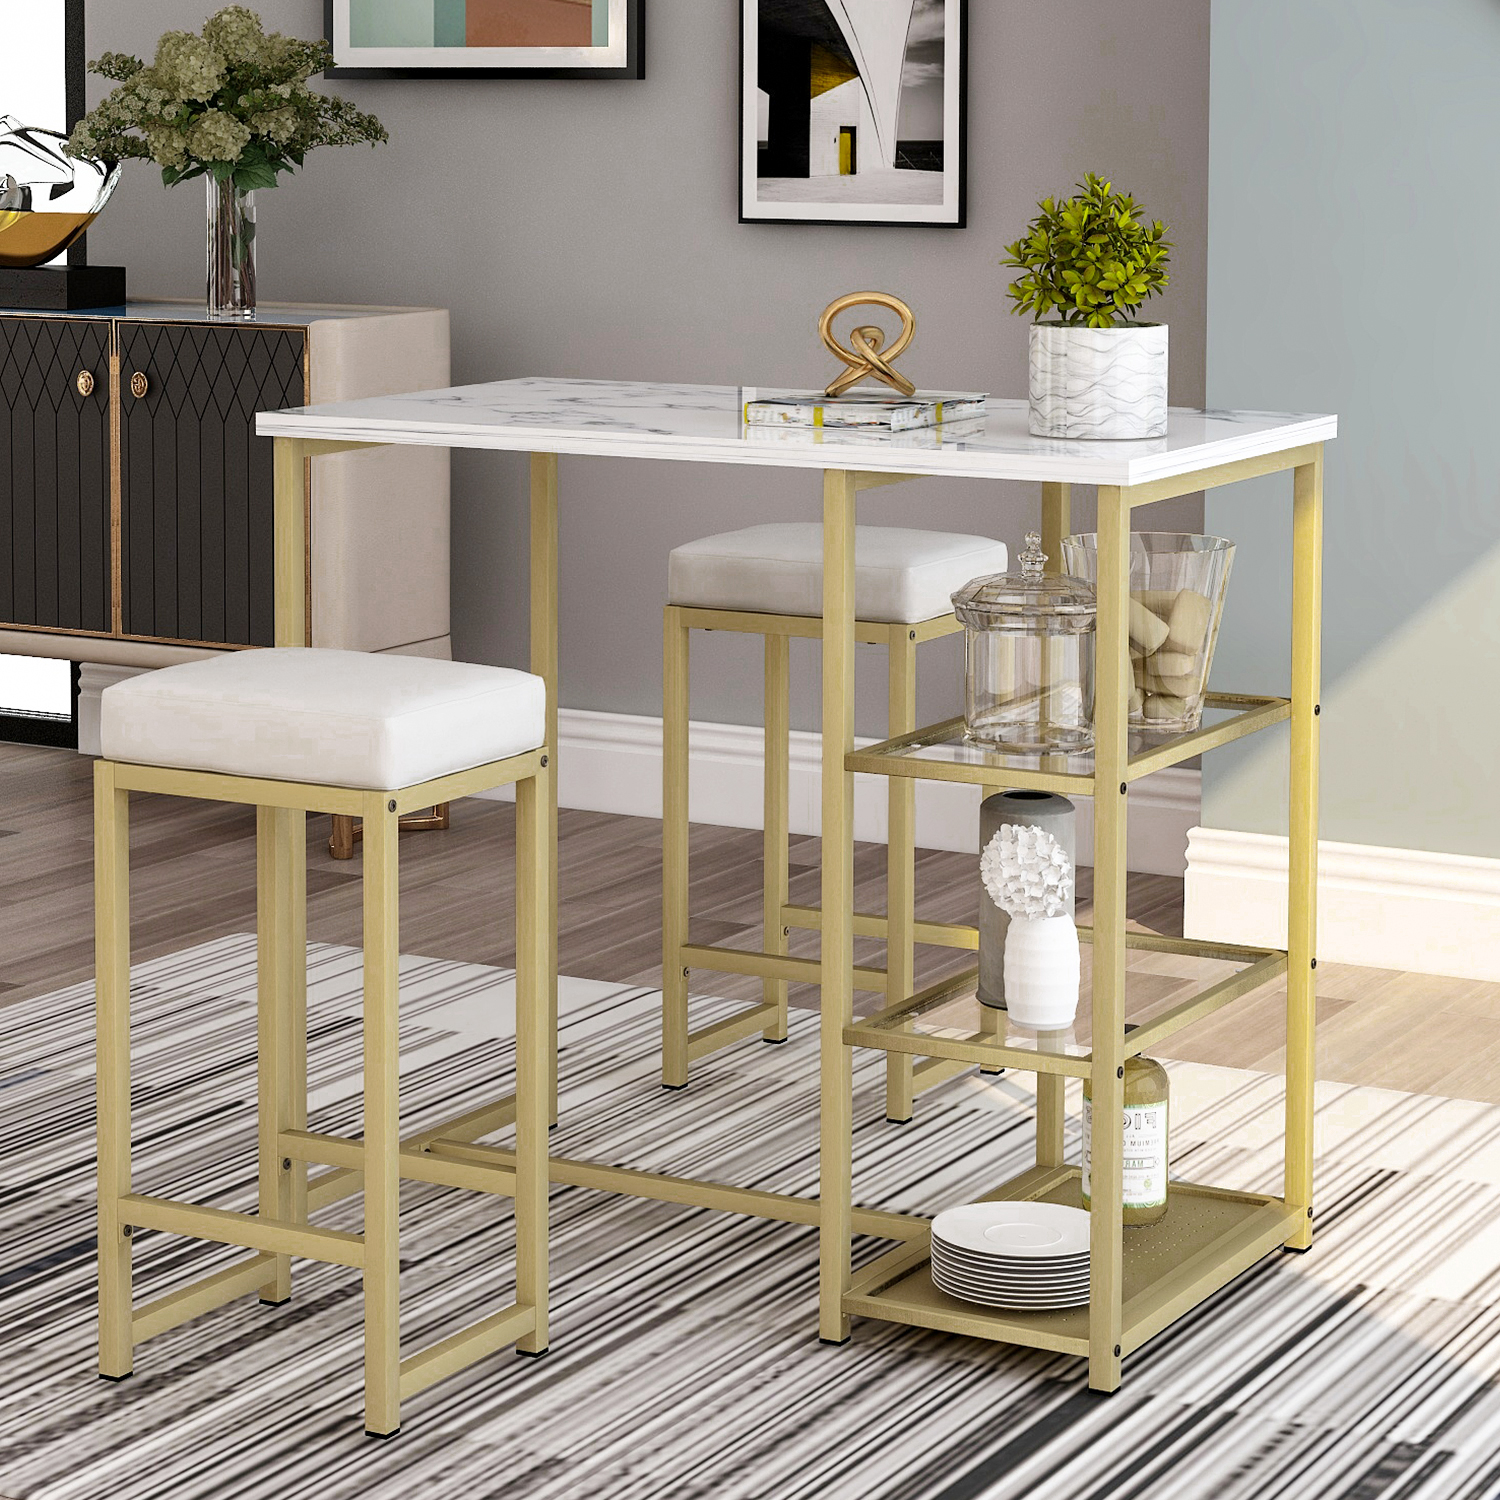 3-Piece Modern Pub Set With Faux Marble Countertop And Bar Stools